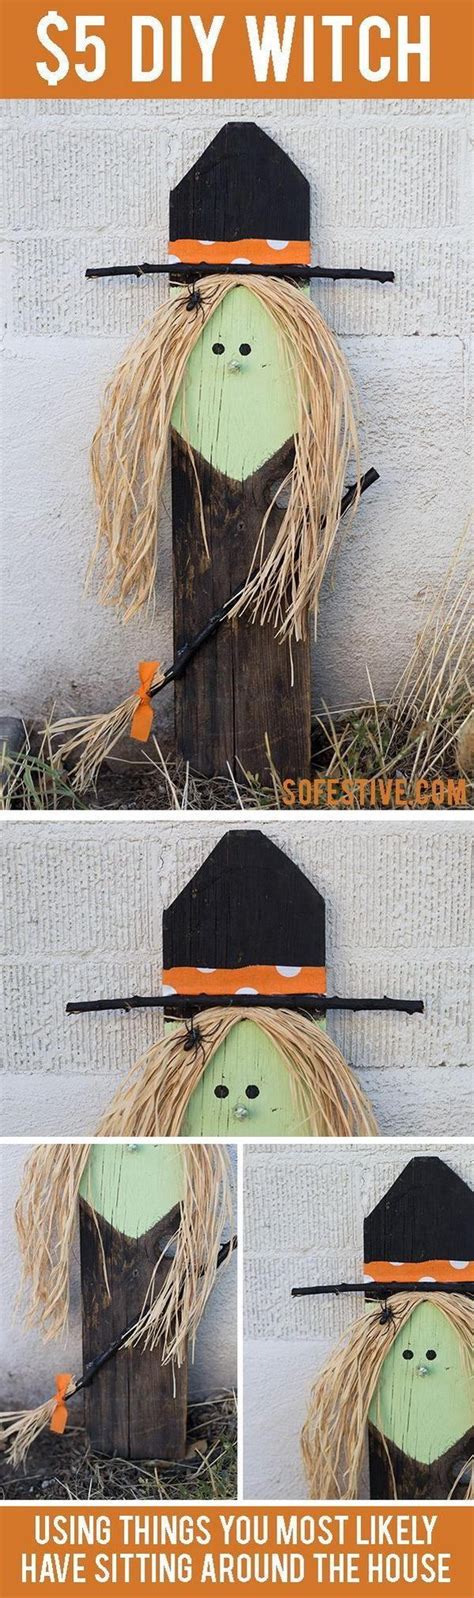 30 Awesome Diy Halloween Outdoor Decorations Ideas Cheap Halloween